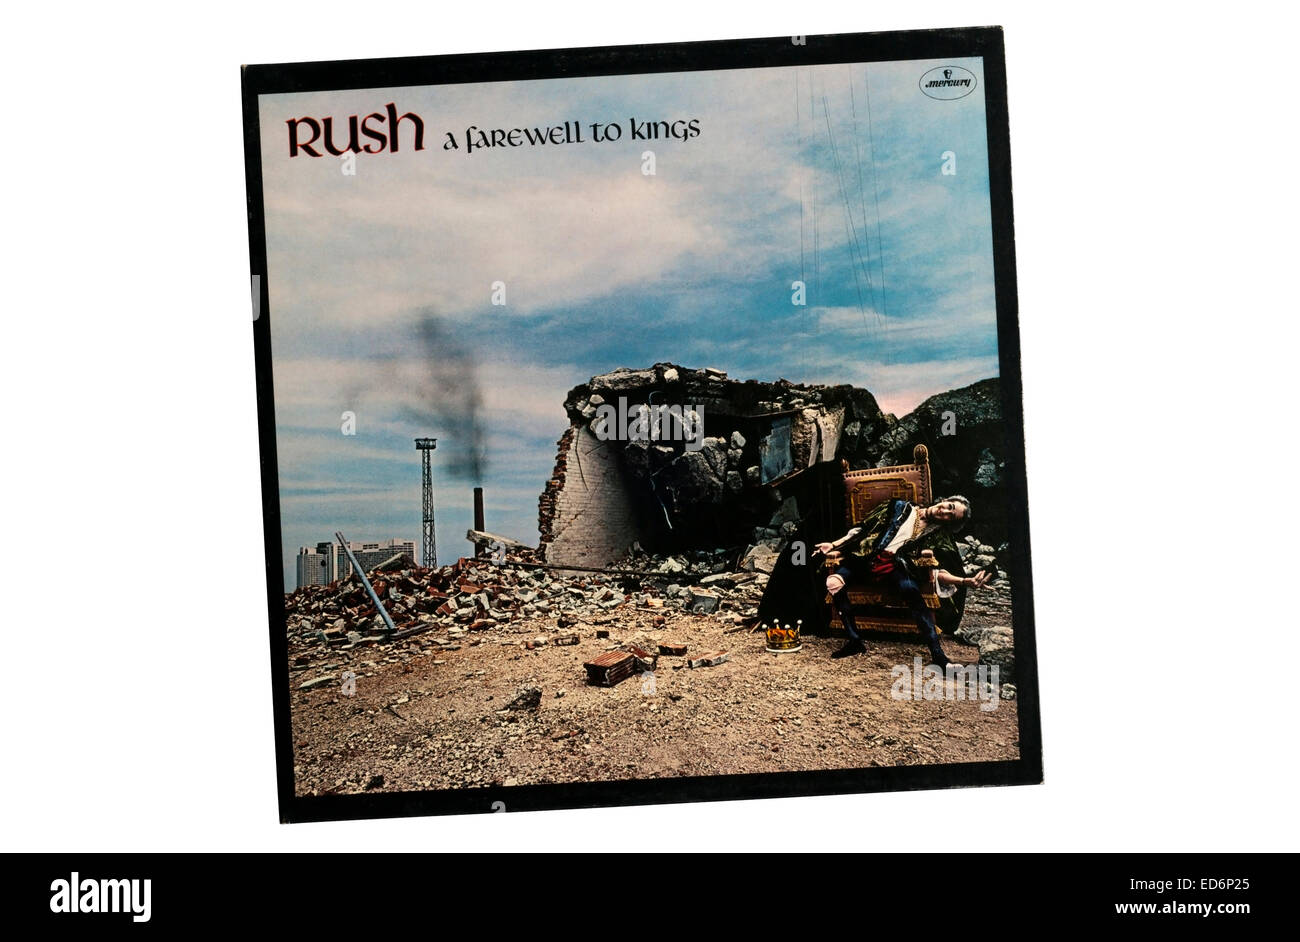 A Farewell to Kings was the 5th studio album by Canadian rock band Rush, released in 1977. Stock Photo